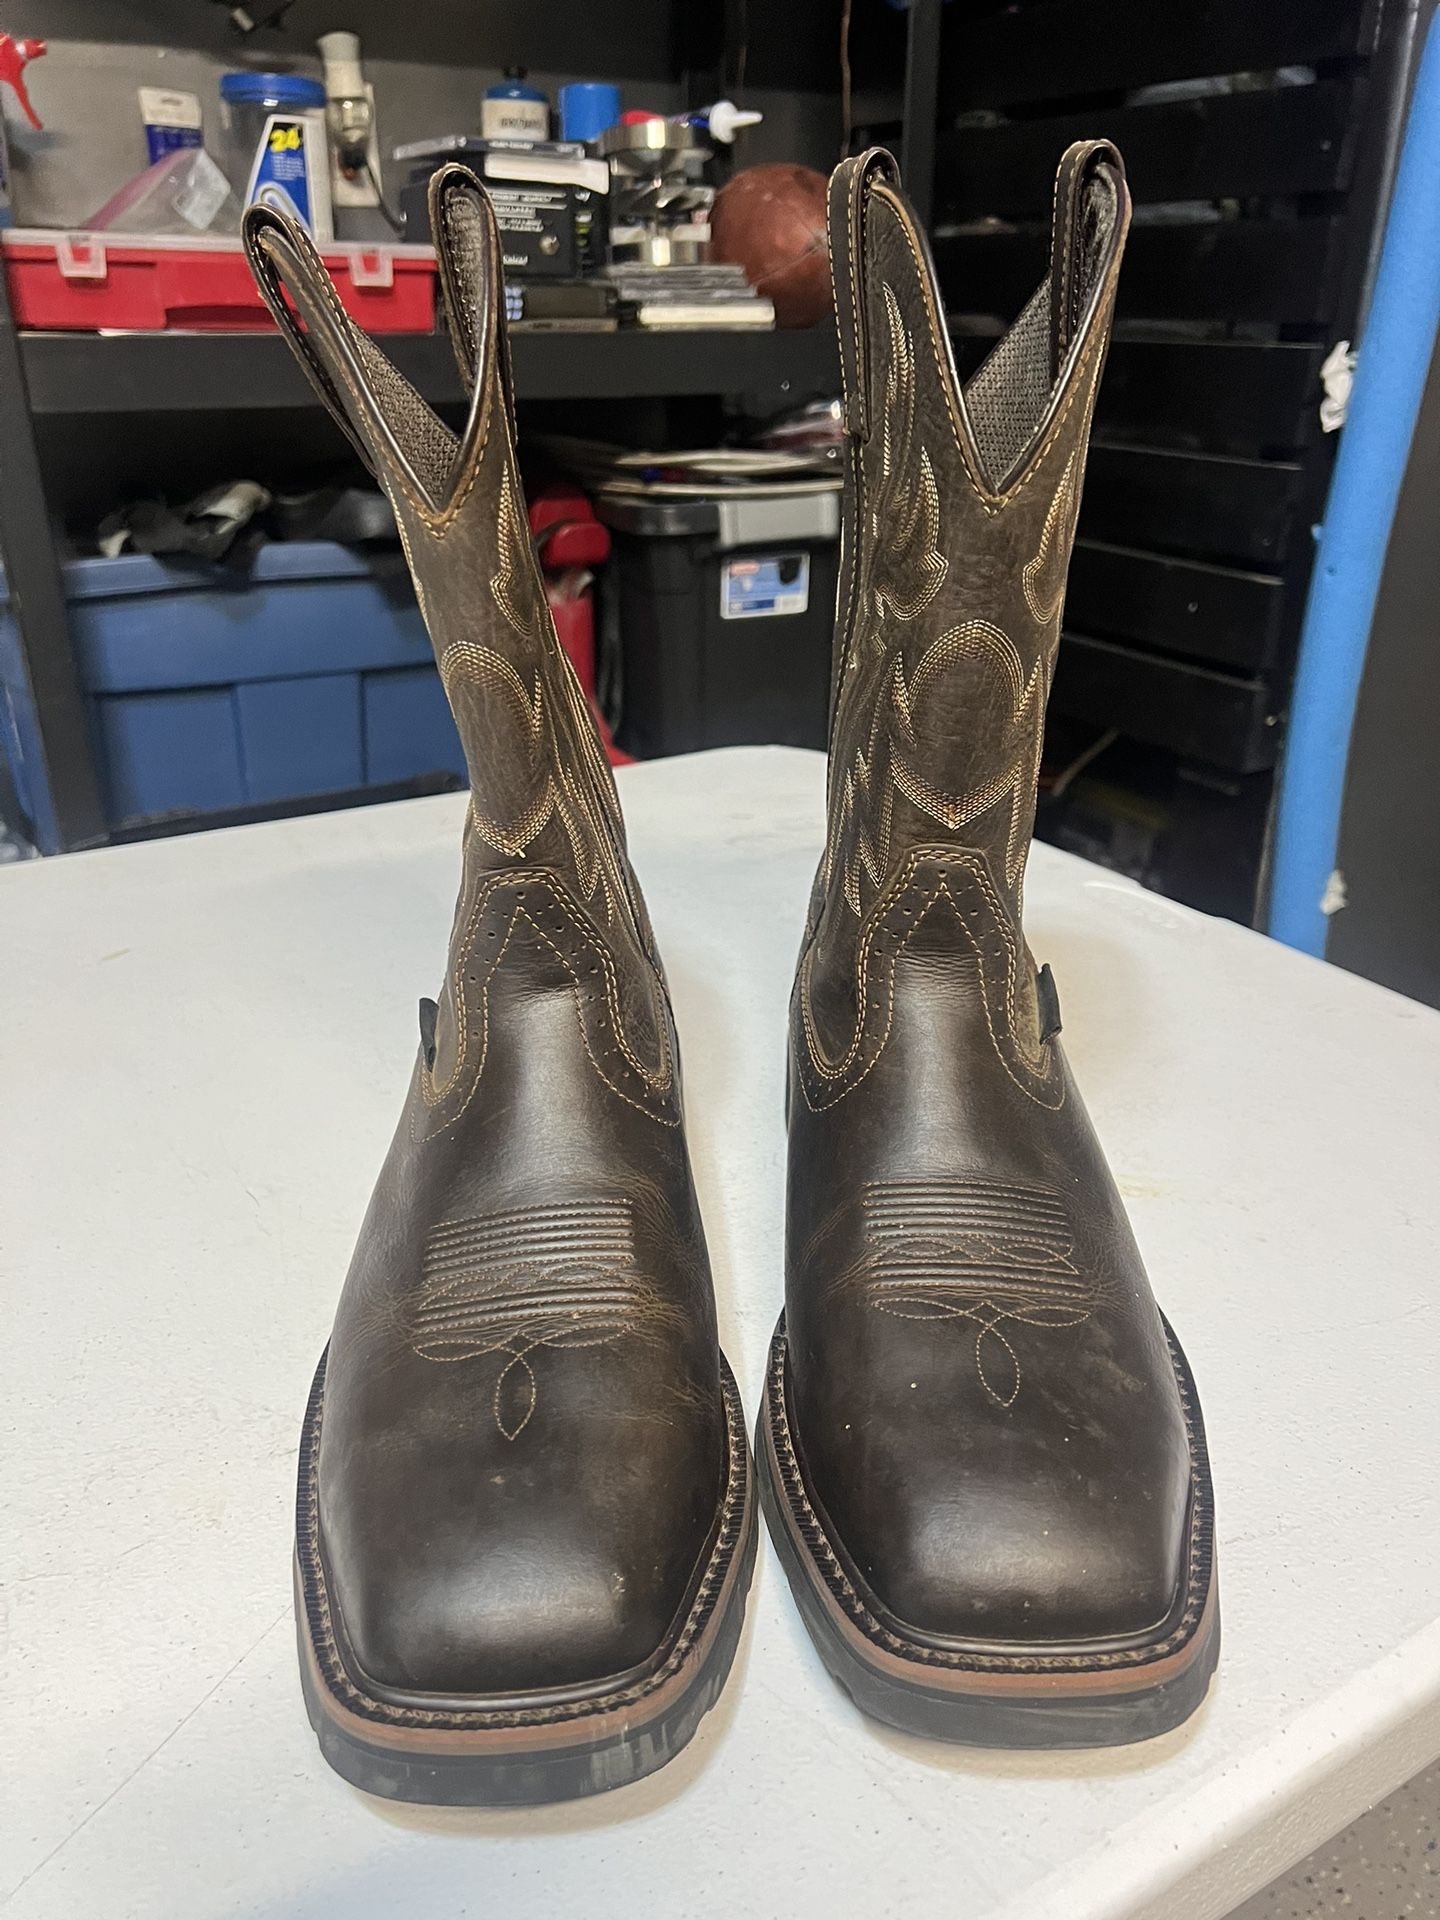 Work Boots Size 12